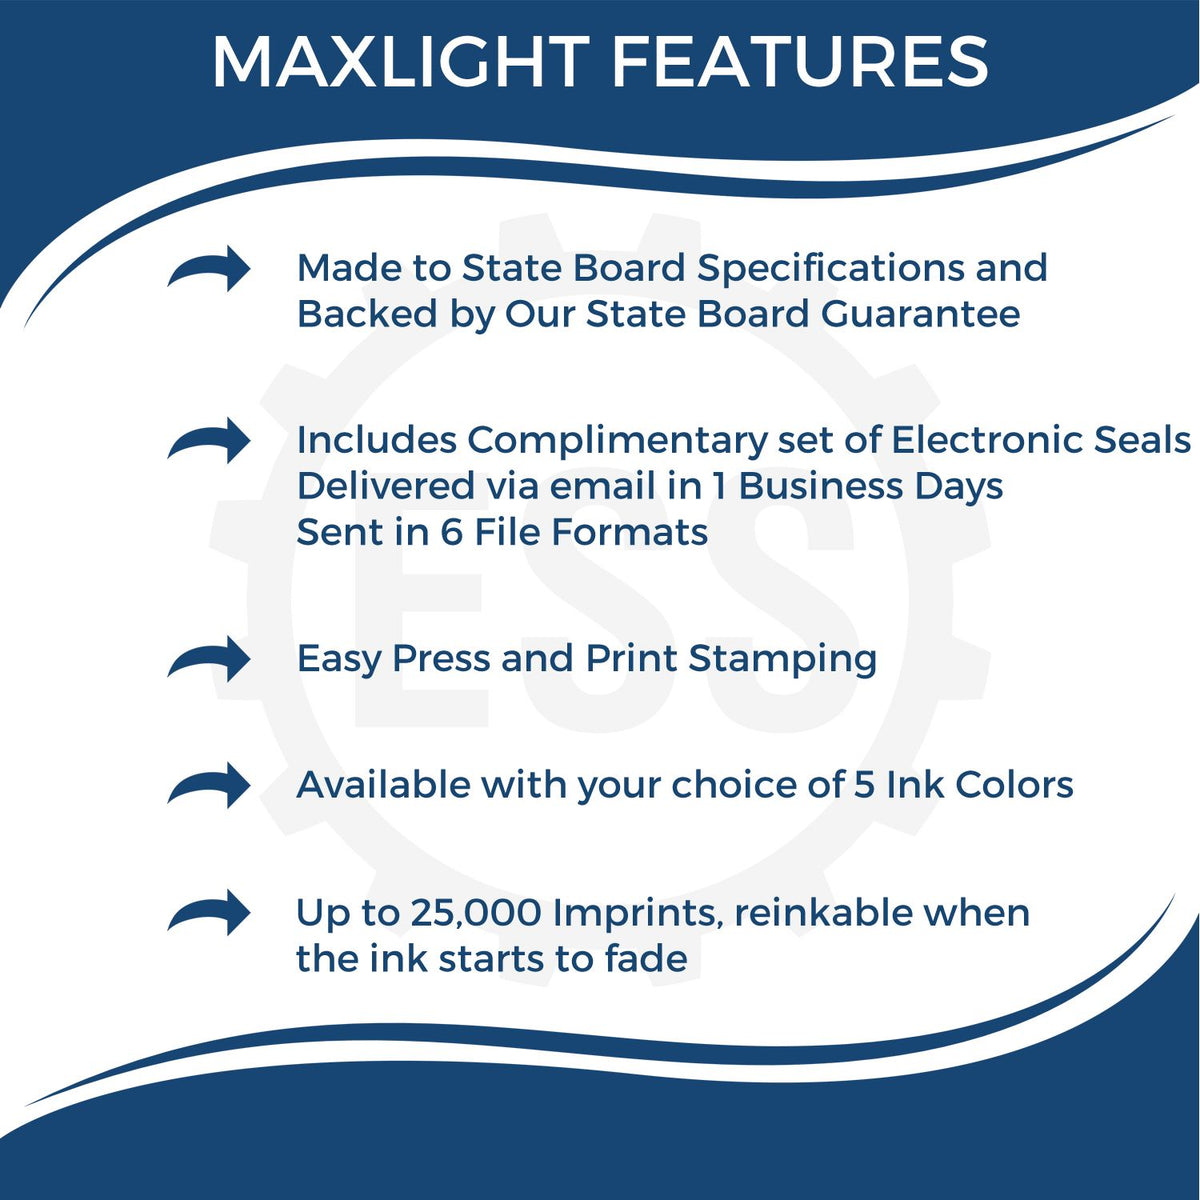 A picture of an infographic highlighting the selling points for the Premium MaxLight Pre-Inked Nevada Geology Stamp